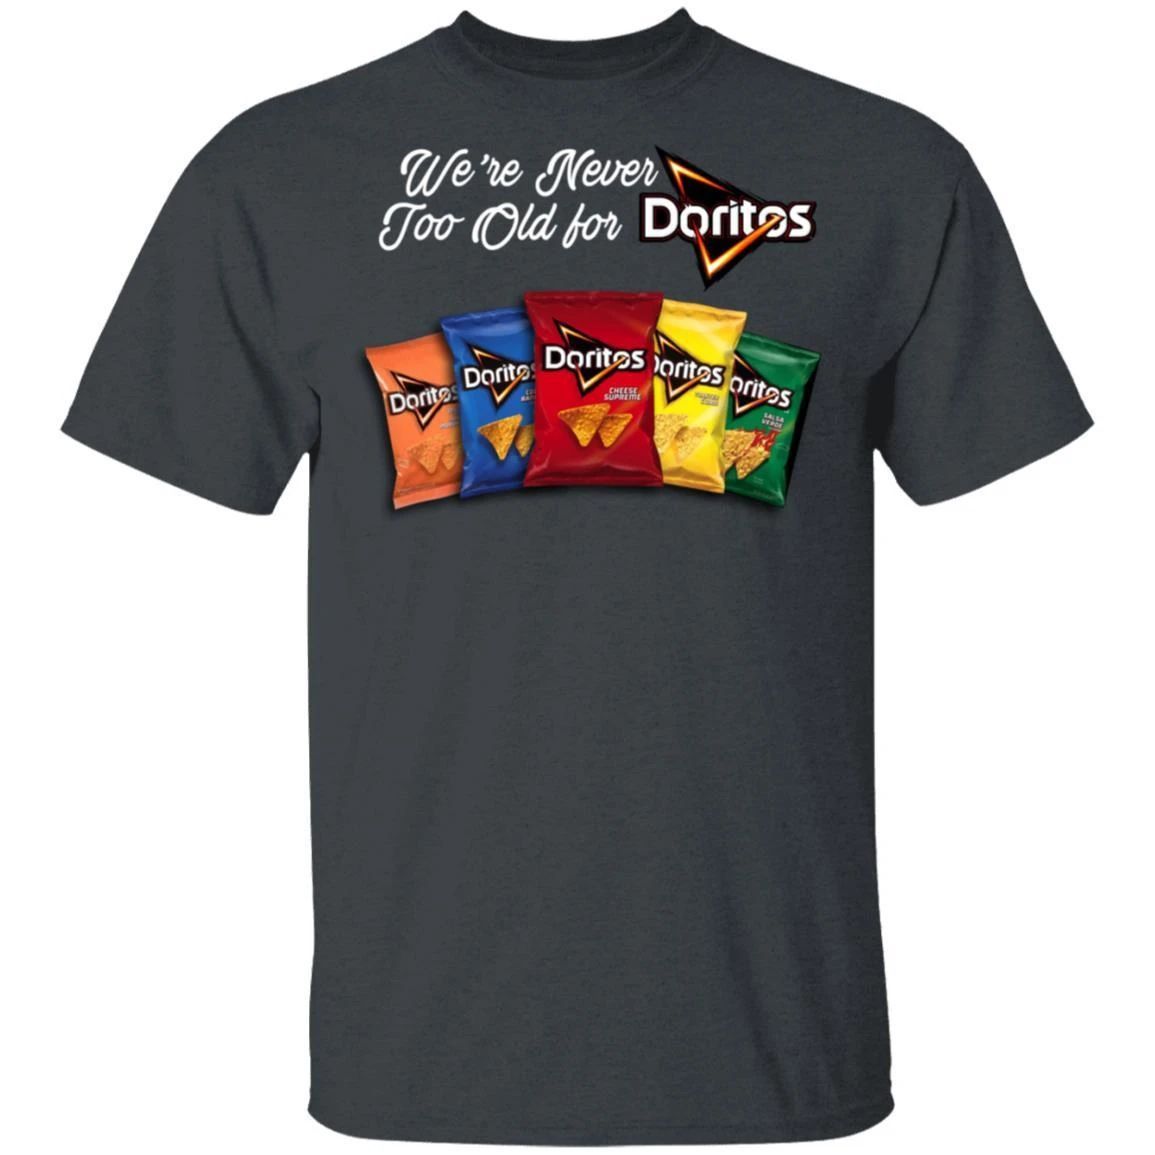 We're Never Too Old For Doritos T-shirt Snack Addict Tee VA12-Bounce Tee